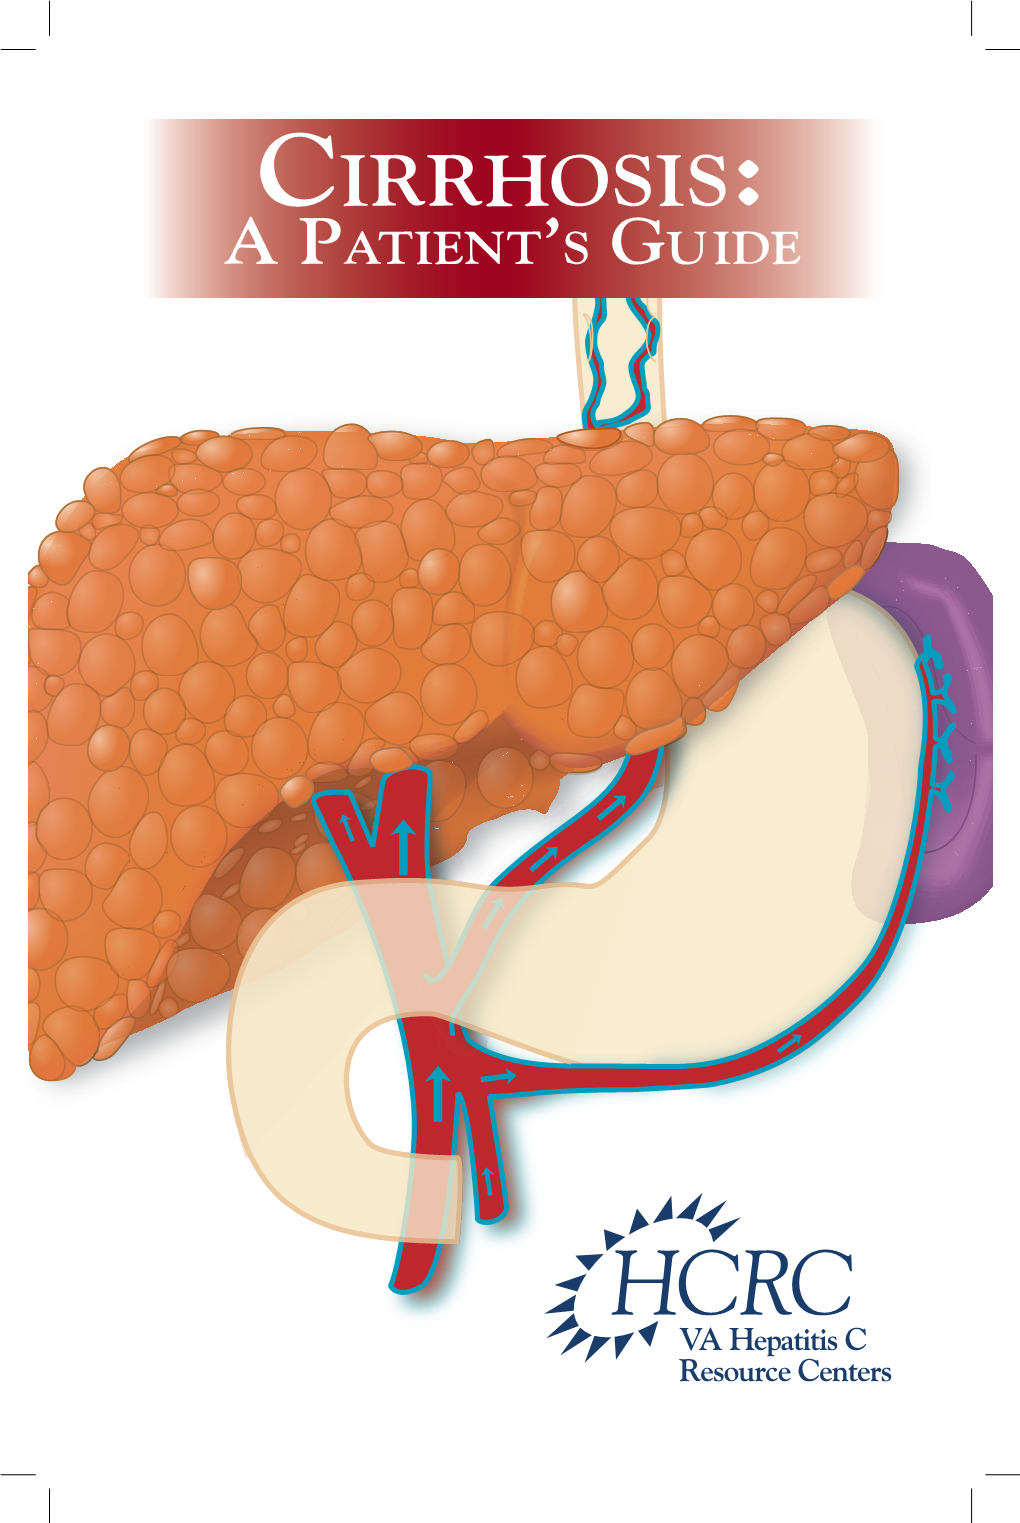 Cirrhosis: a Patient’S Guide the Full Text of This Document Can Be Found and Down- Loaded At